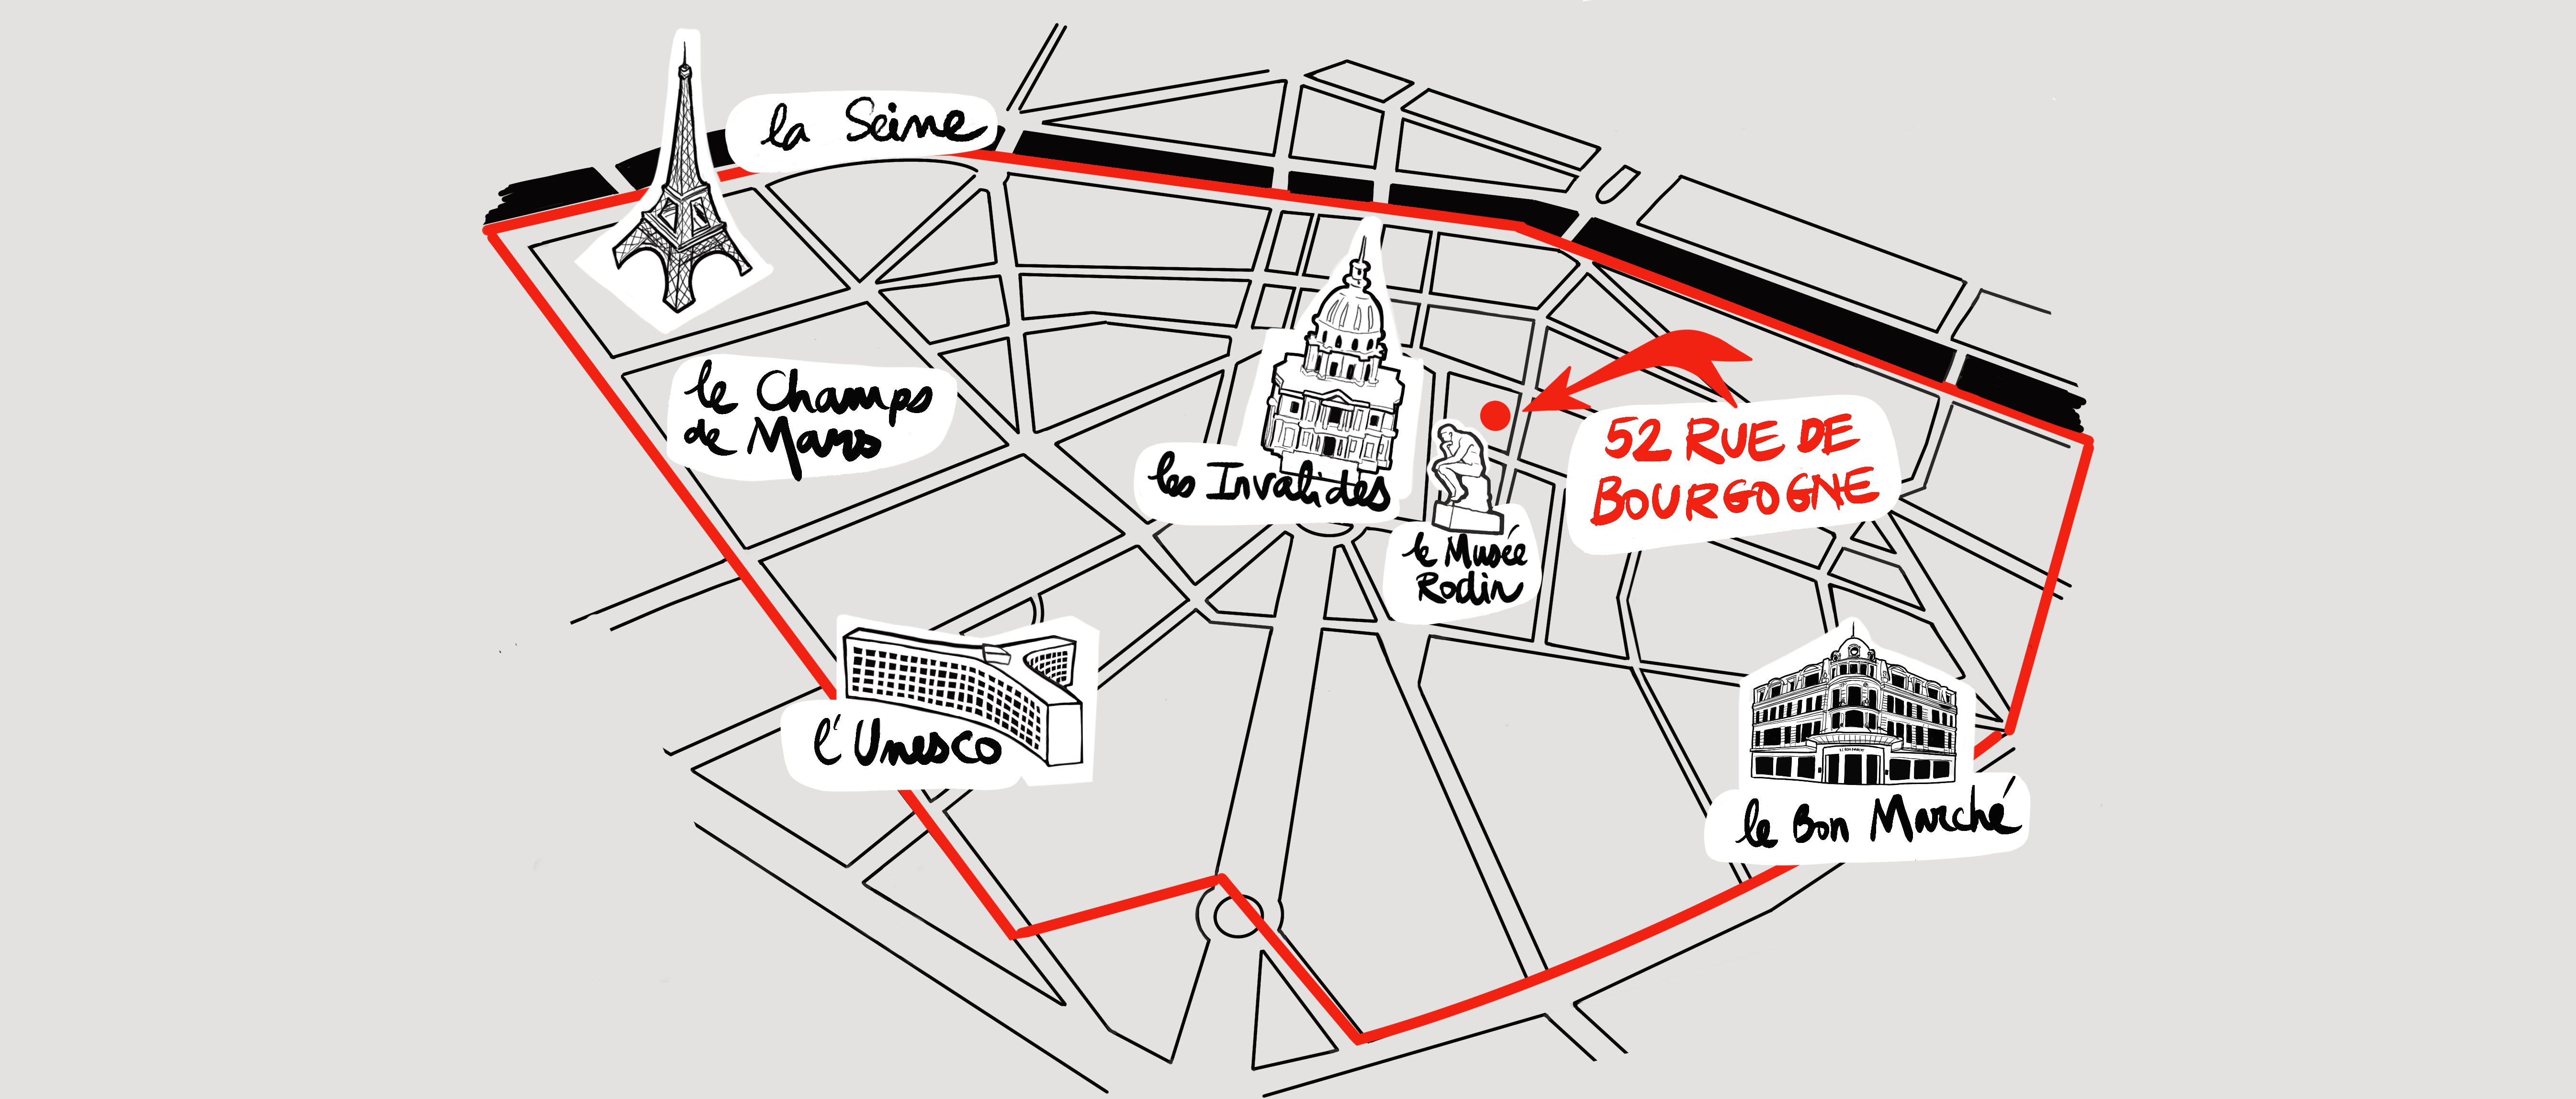 Artistic Sketch of the 7th District of Paris